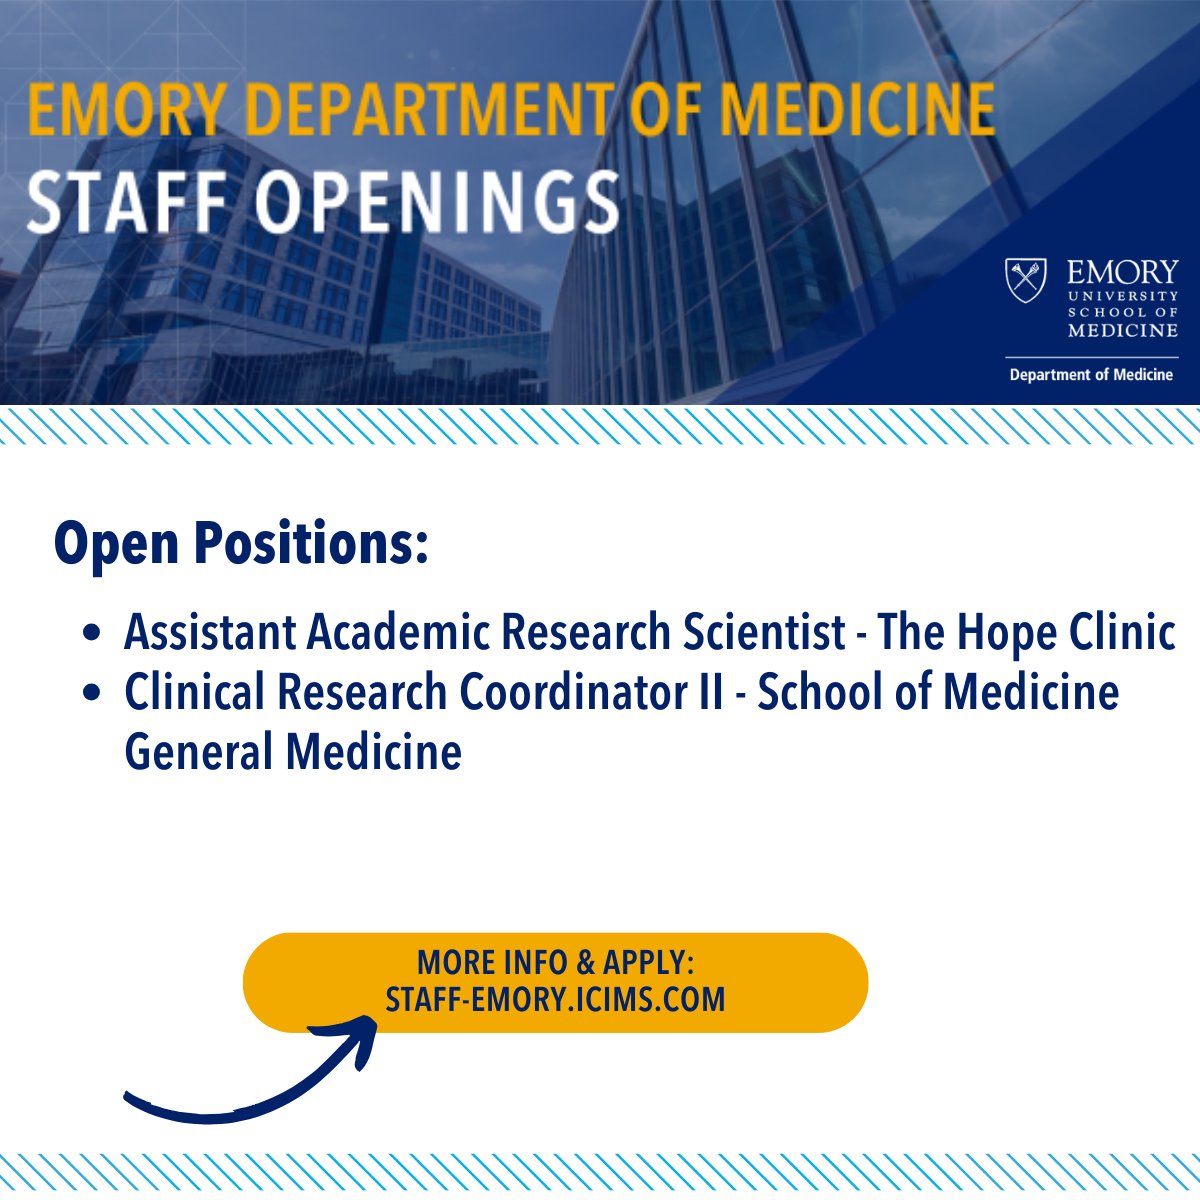 🔔Attention job seekers! Emory Department of Medicine is hiring! Check out the latest open staff positions on our team! Learn more and apply 👉️linktr.ee/emorydeptofmed #IDjobs #GIMjobs #nowhiring #emorycareers